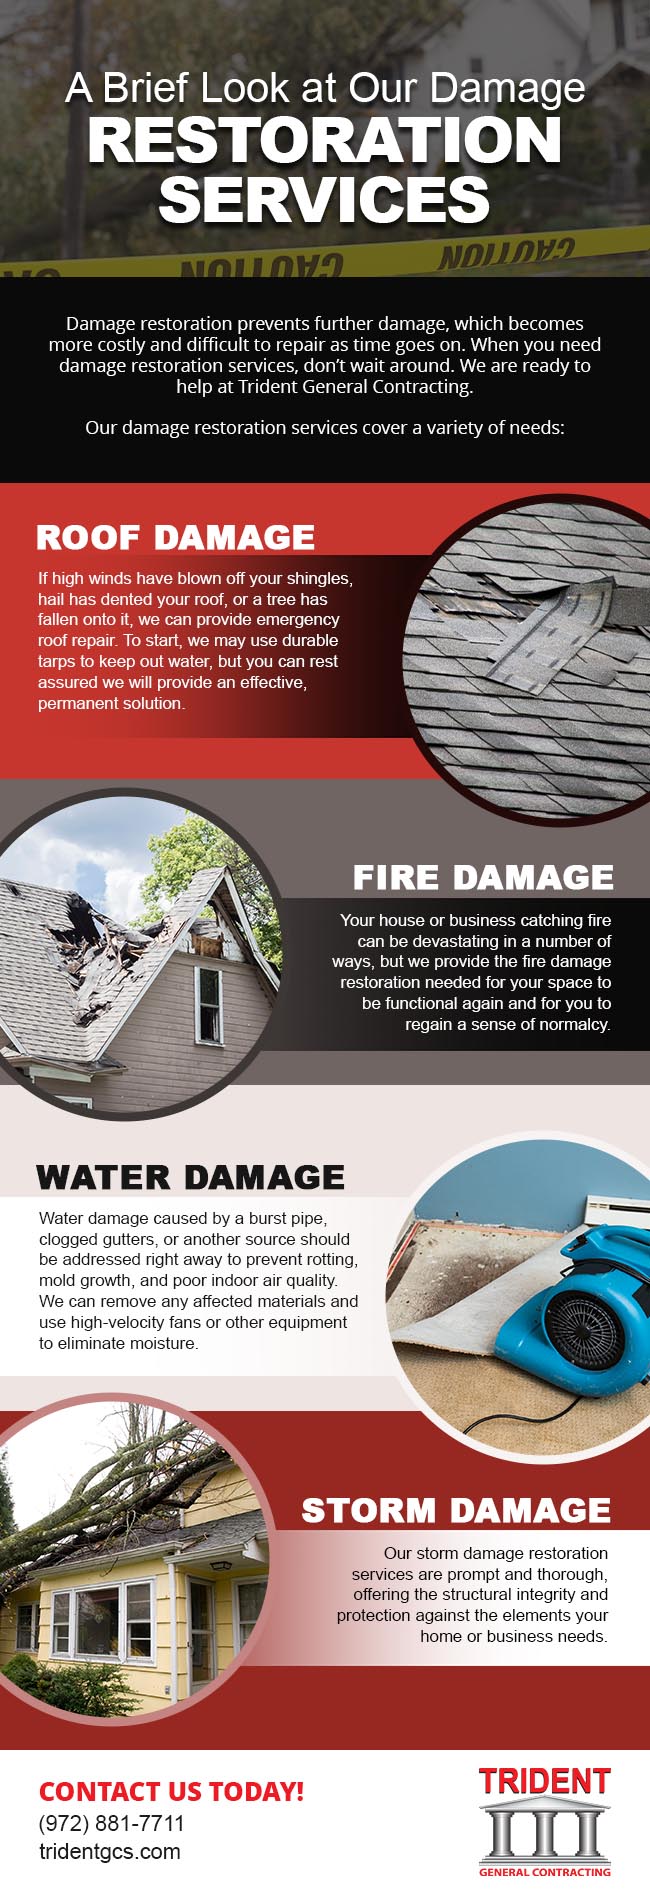 No Matter What Has Damaged Your Home, We Can Help You Restore It